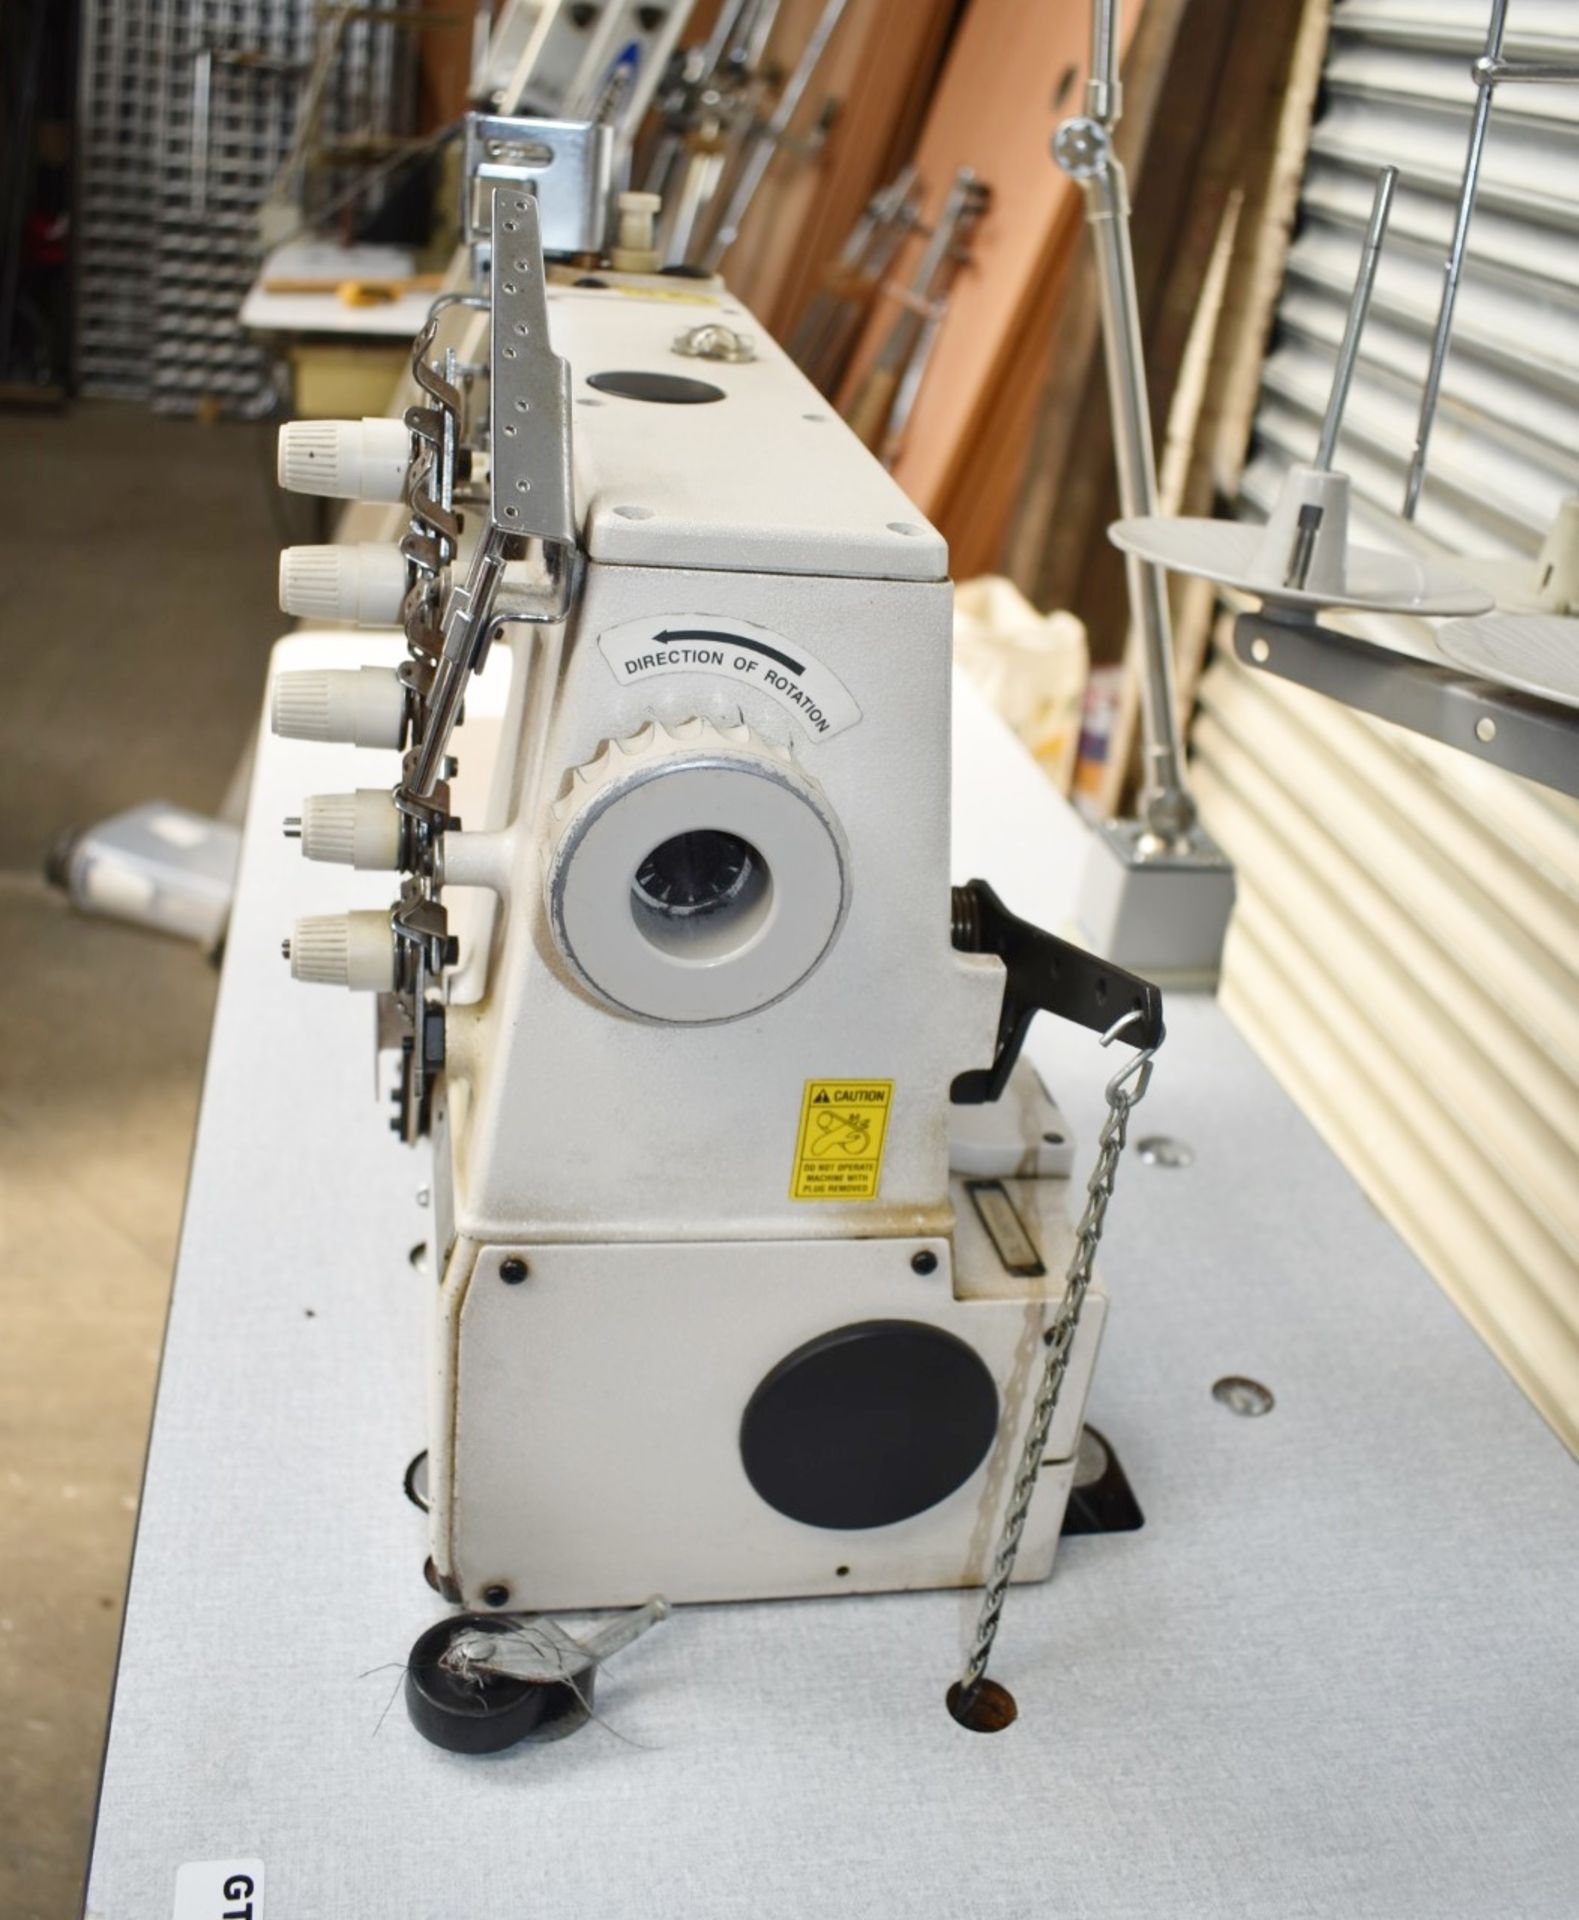 1 x Juki Union Special High-Speed Flat Bed Industrial Sewing Machine - Model FS332H01-3B56 - Image 13 of 30